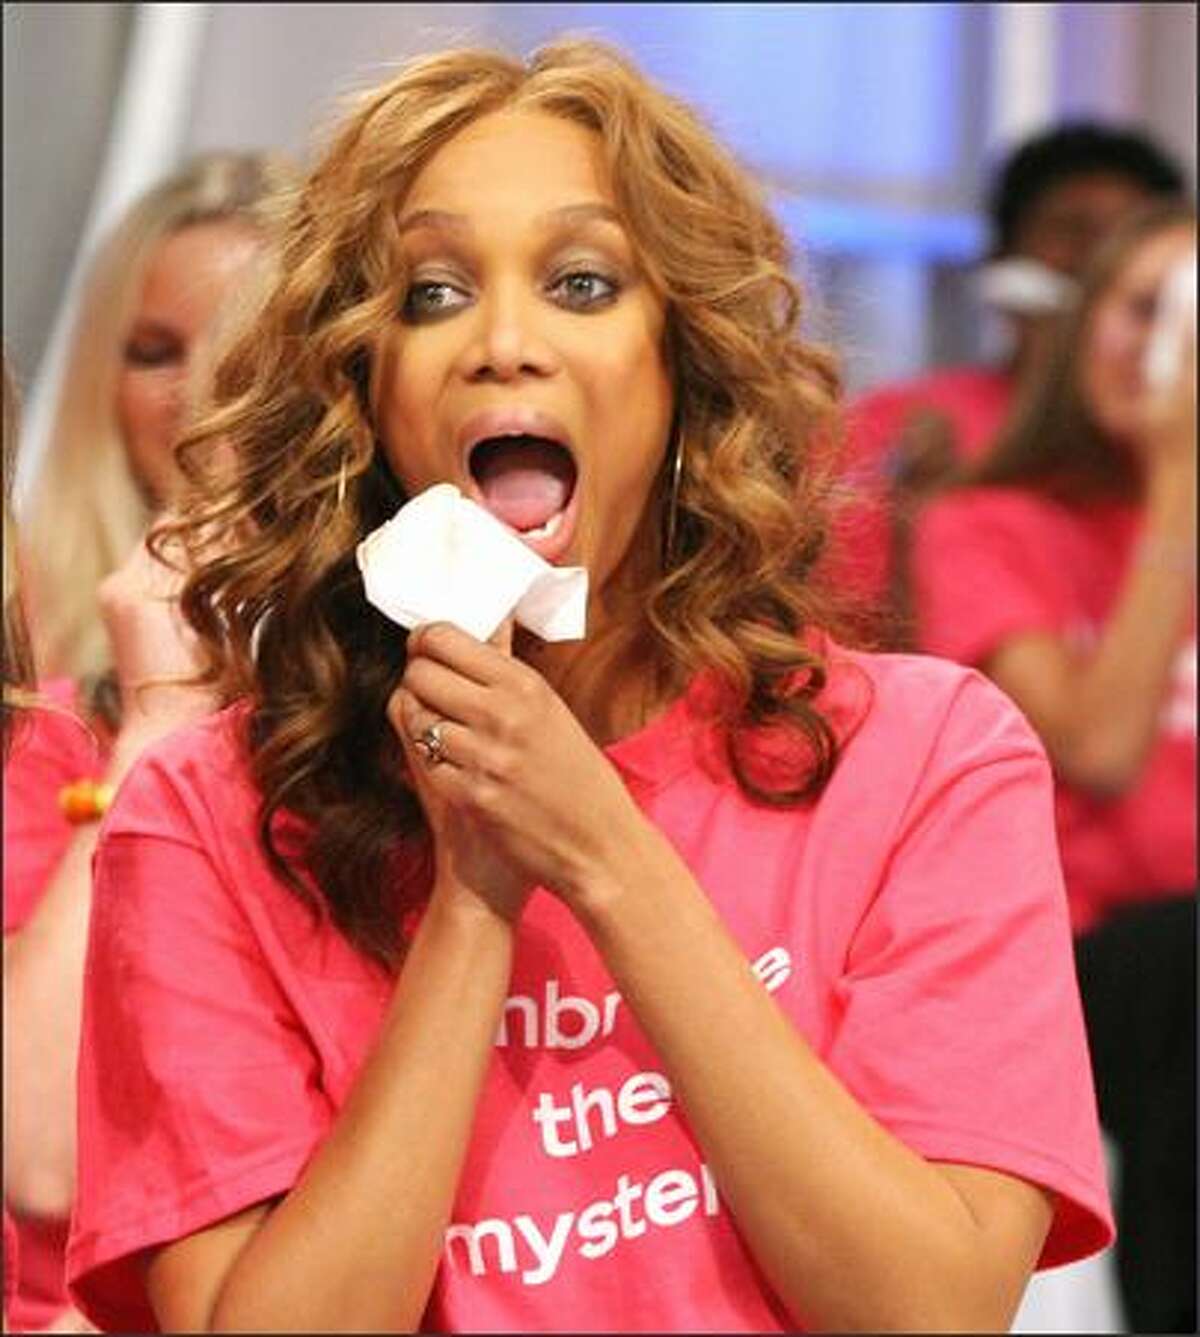 Model turned talk-show hostess Tyra Banks encourages her studio audience to reveal their natural beauty by wiping off all their makeup. On the premiere of her eponymous show, which airs today, Banks reveals that even professional models like her get retouched in photos.